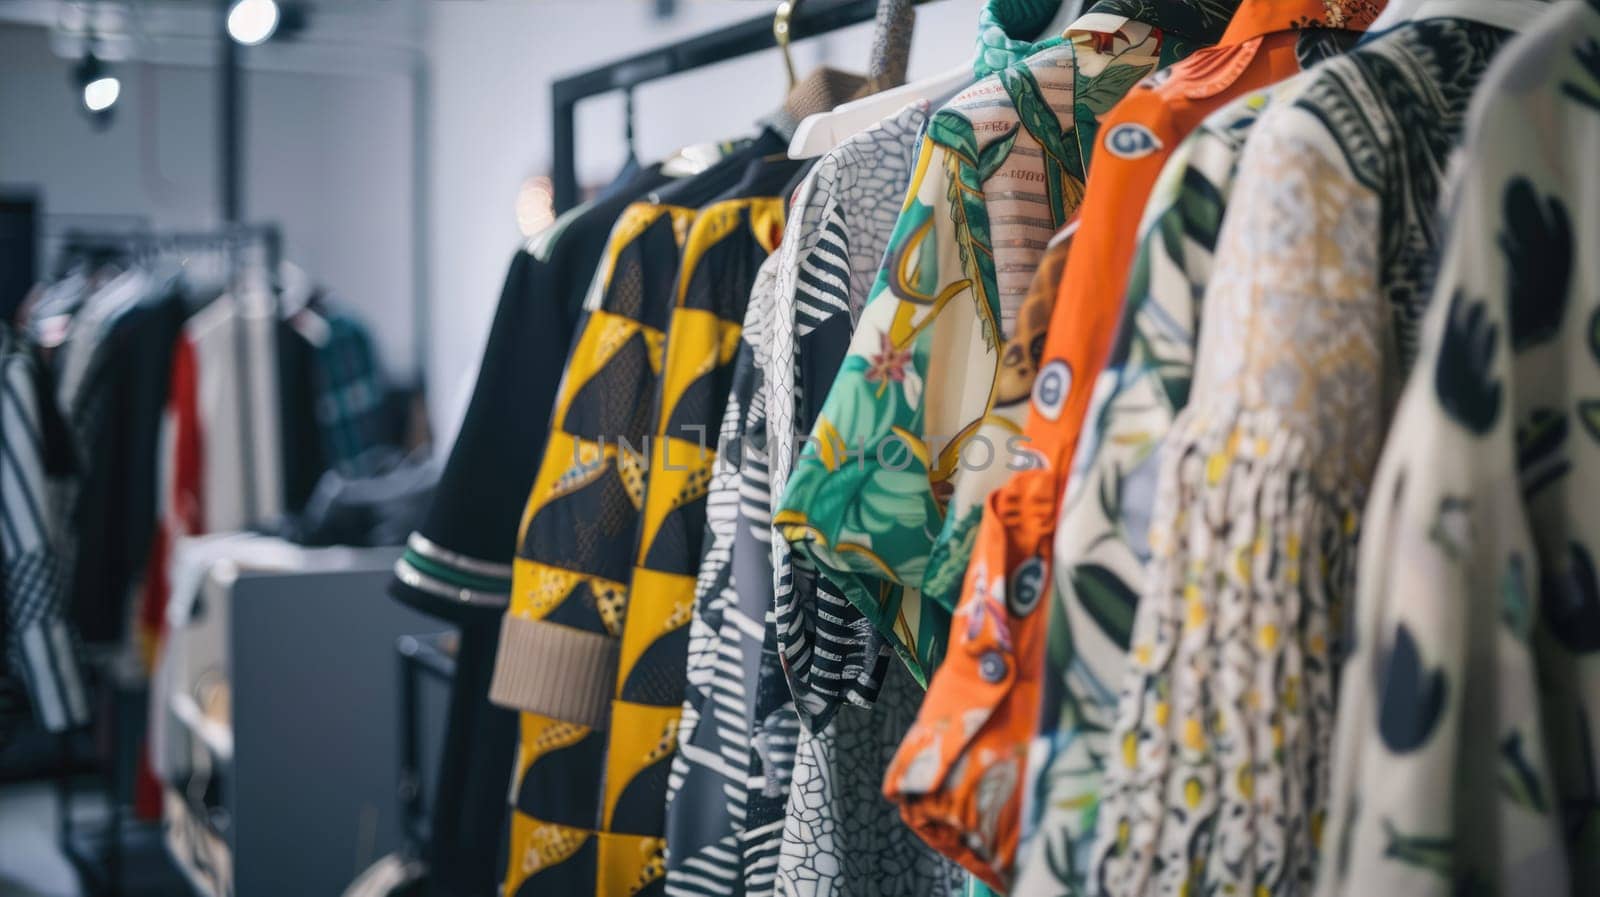 An array of textiles with intricate patterns and unique sleeve designs hang on display at a boutique, showcasing the art and creativity of fashion design AI